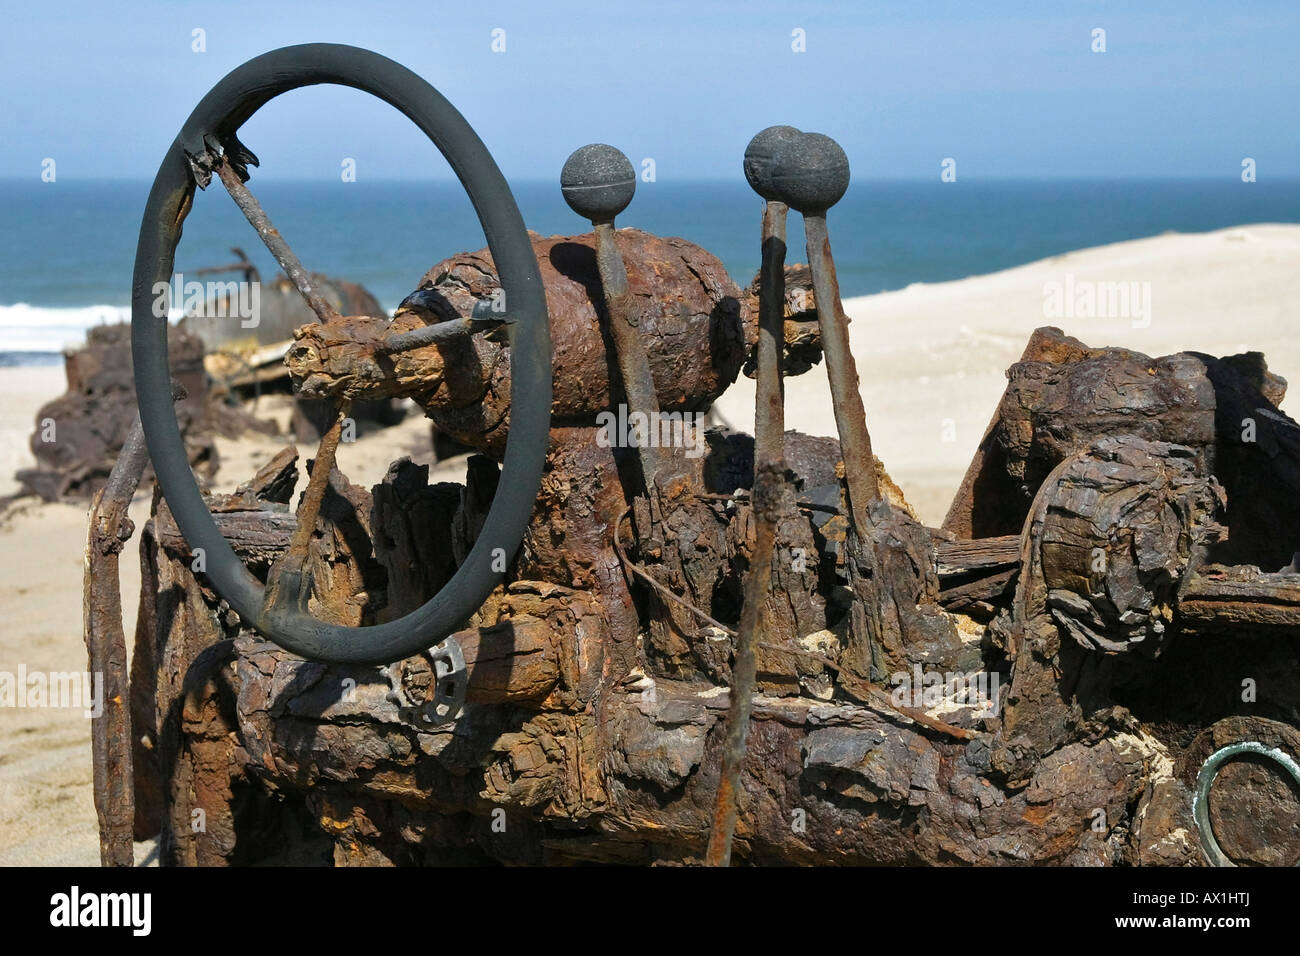 Old strong rusted steering wheel from a track vehicle, diamond prohibited area, Saddlehill, Atlantic Ocean, Namibia, Africa Stock Photo